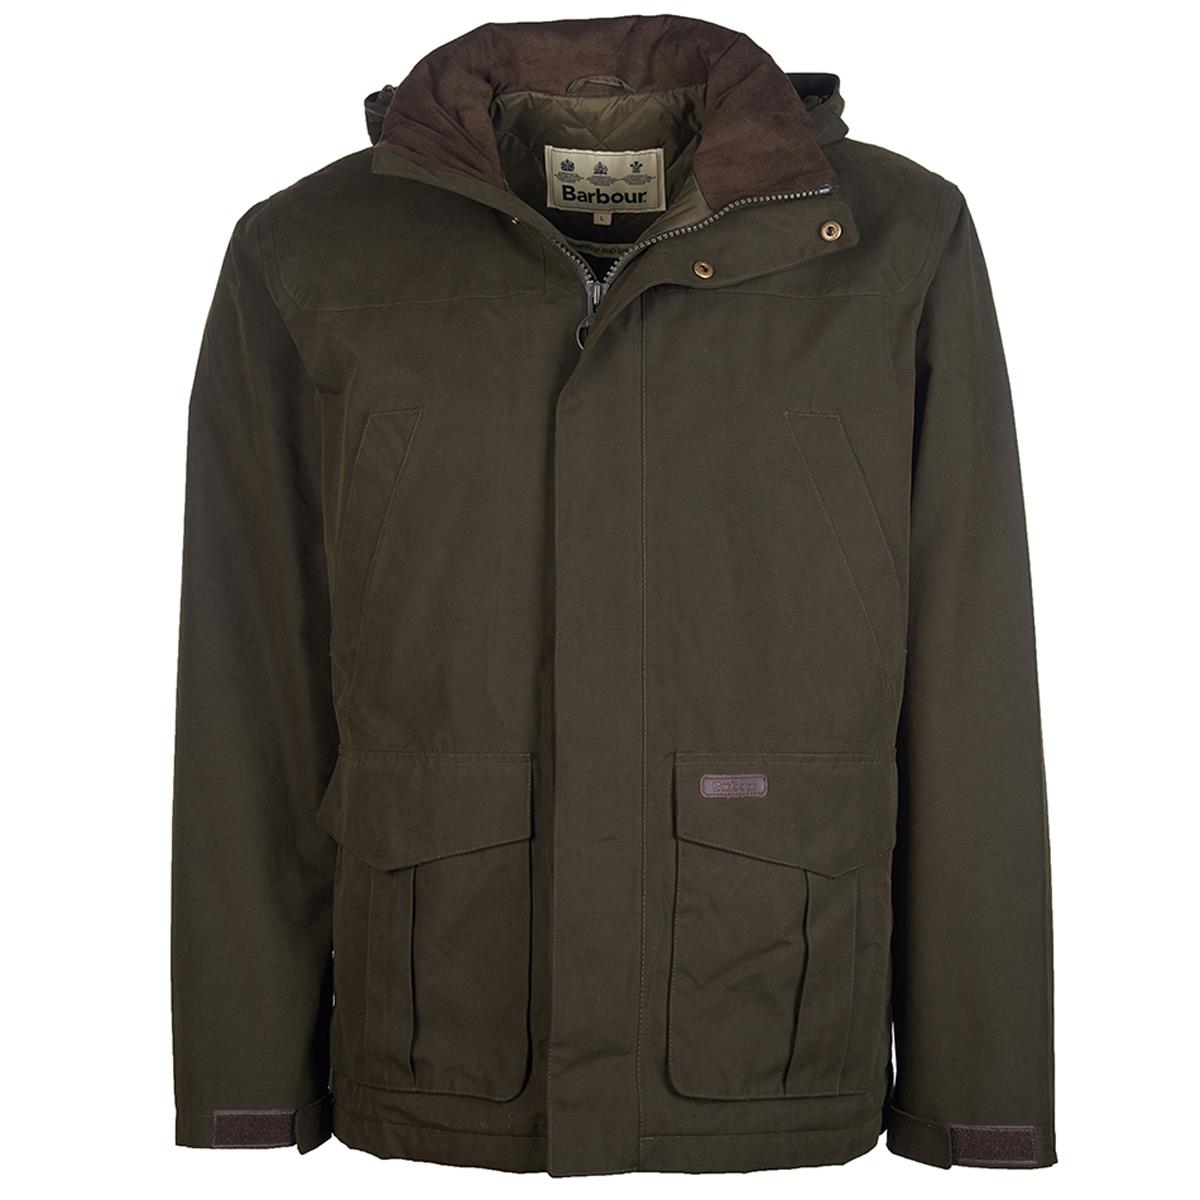 What makes the Barbour Brockstone Jacket stand out?